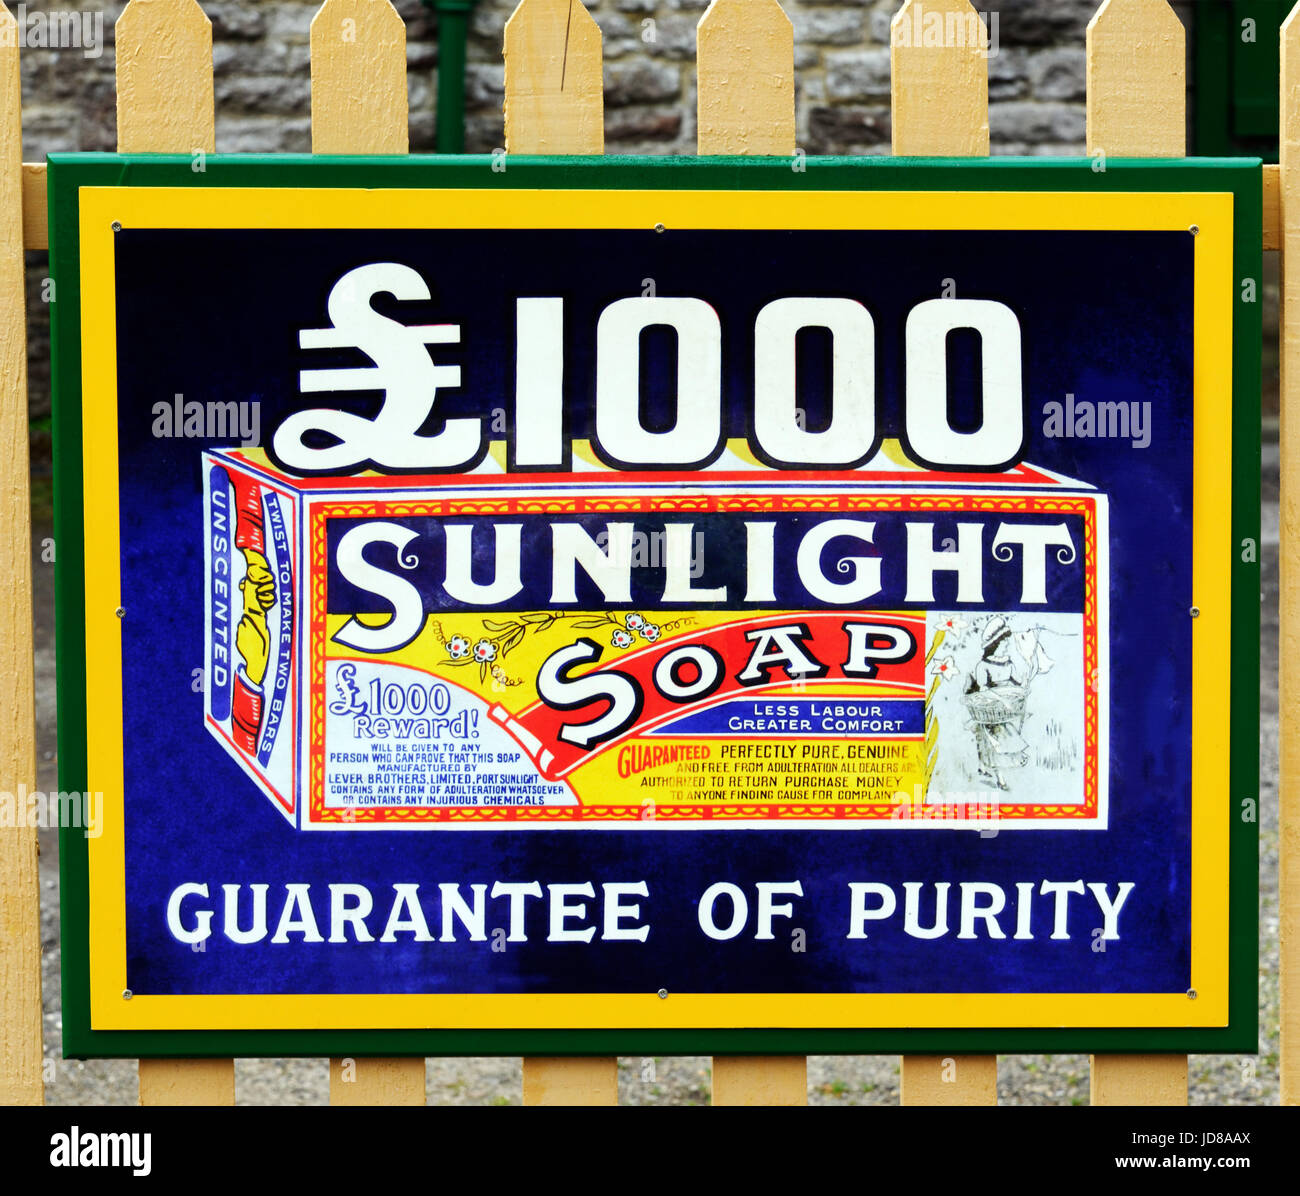 An old advertisement for Sunlight Soap Stock Photo